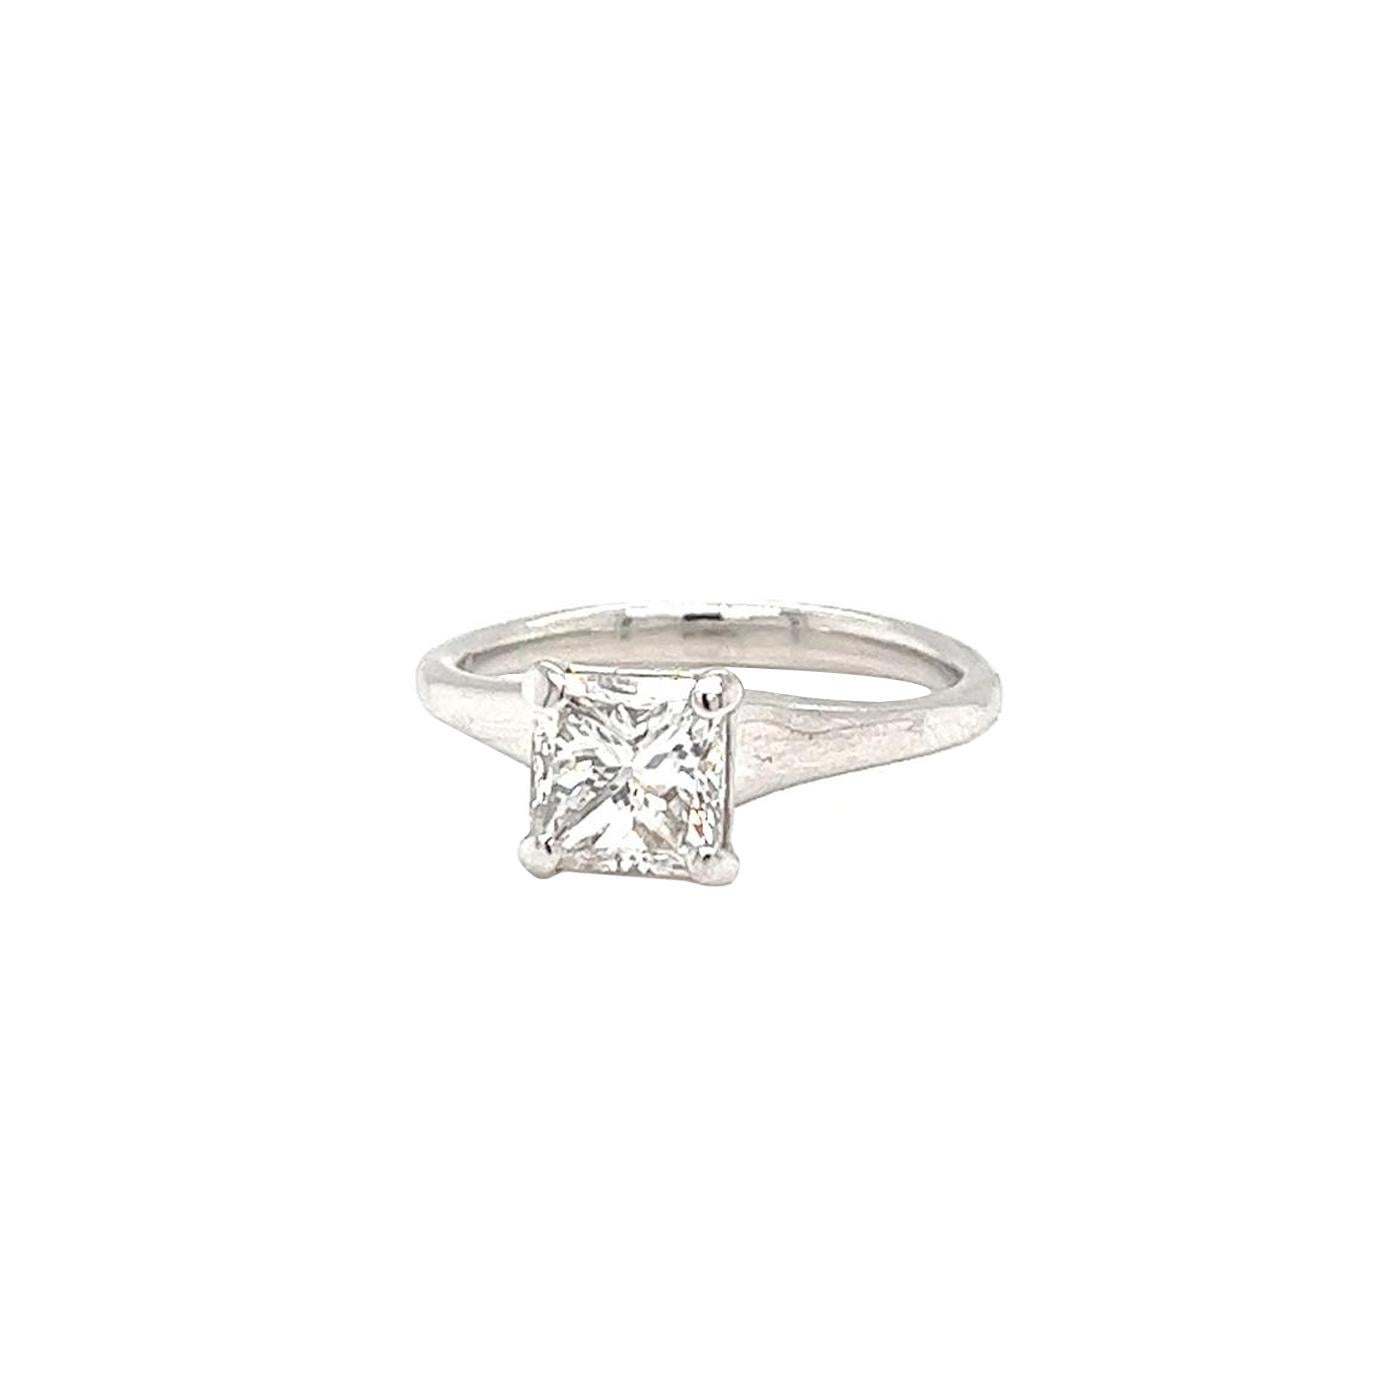 A Platinum Diamond Ring. Features a GIA-graded Center Natural Princess Cut Fancy 1.50ct Diamond Ring with measurement of (6.33 x 6.24 x 4.66 mm), VS2 Clarity and H in Colour with a Very Good Polish Finish, A natural timeless when wearing this